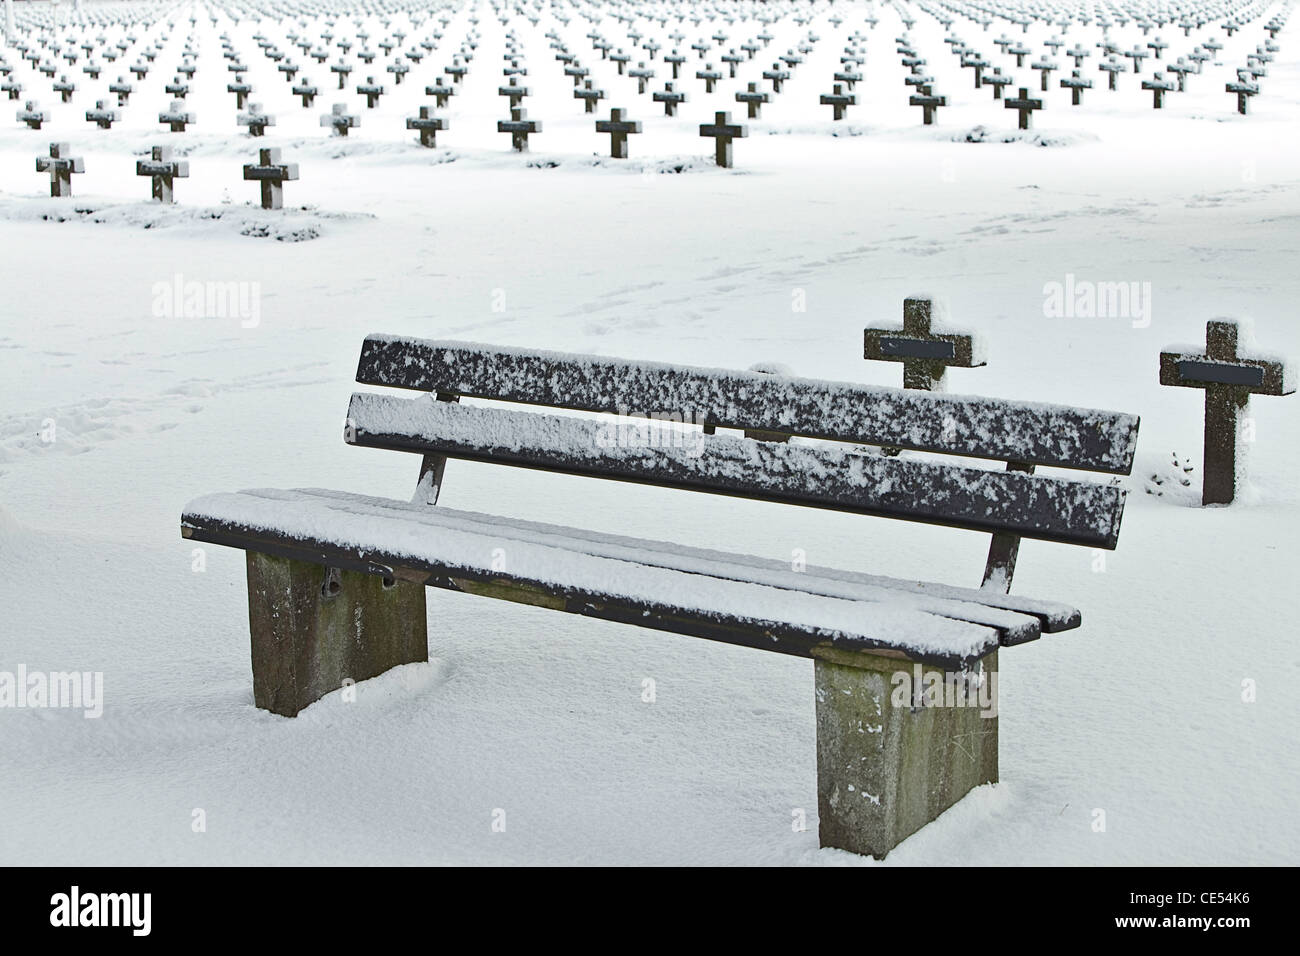 bench at graveyard surrounded with crosses and covered in snow war cemetery in winter military burial ground Stock Photo